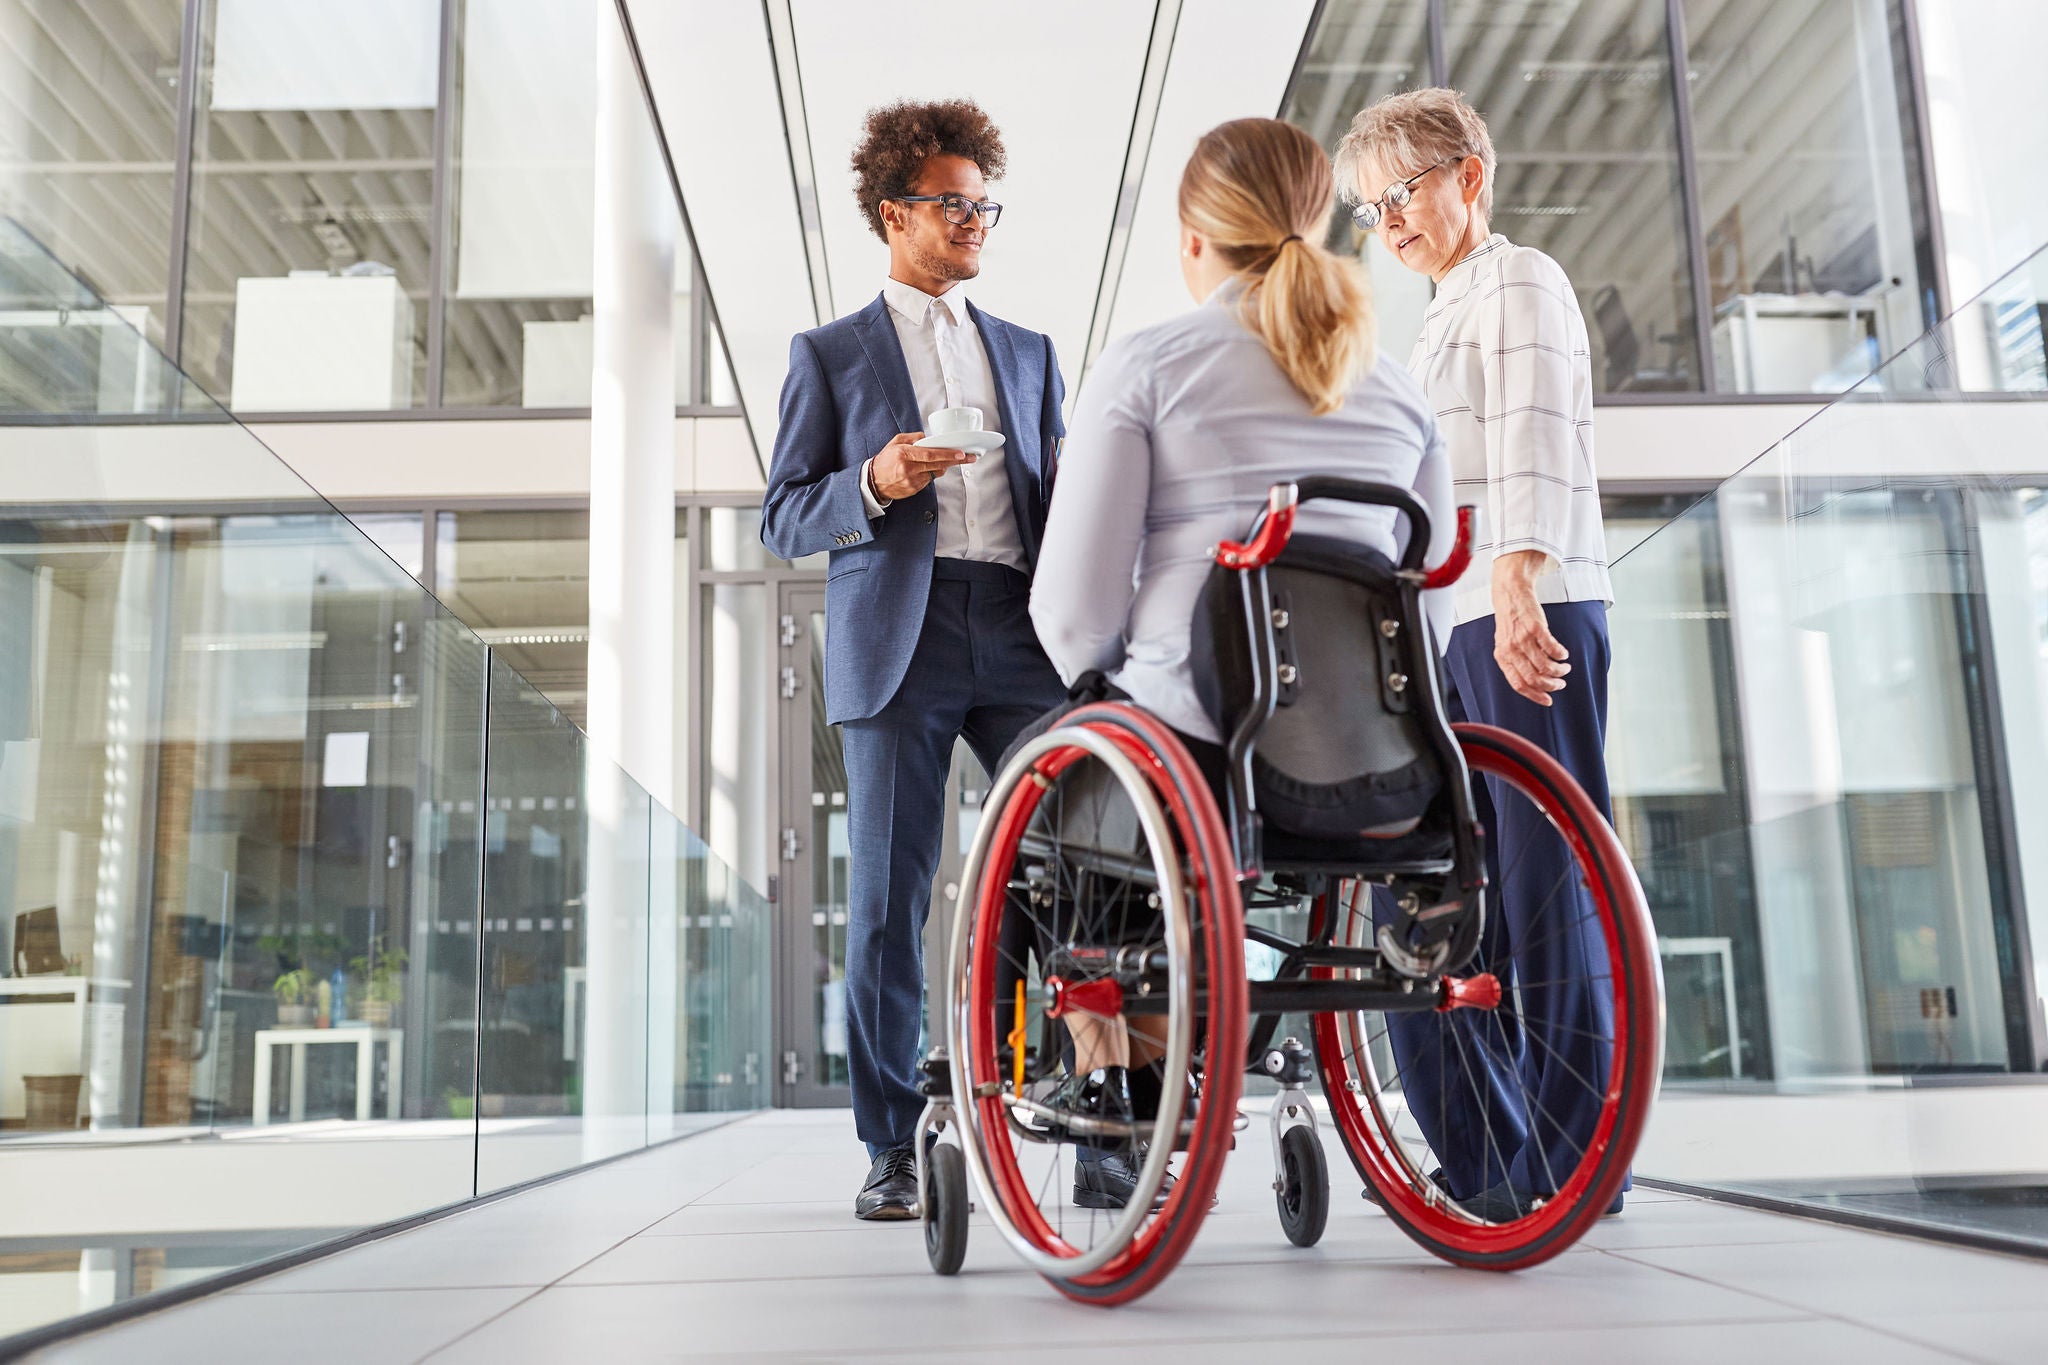 Businesswoman in a wheelchair talking to colleagues